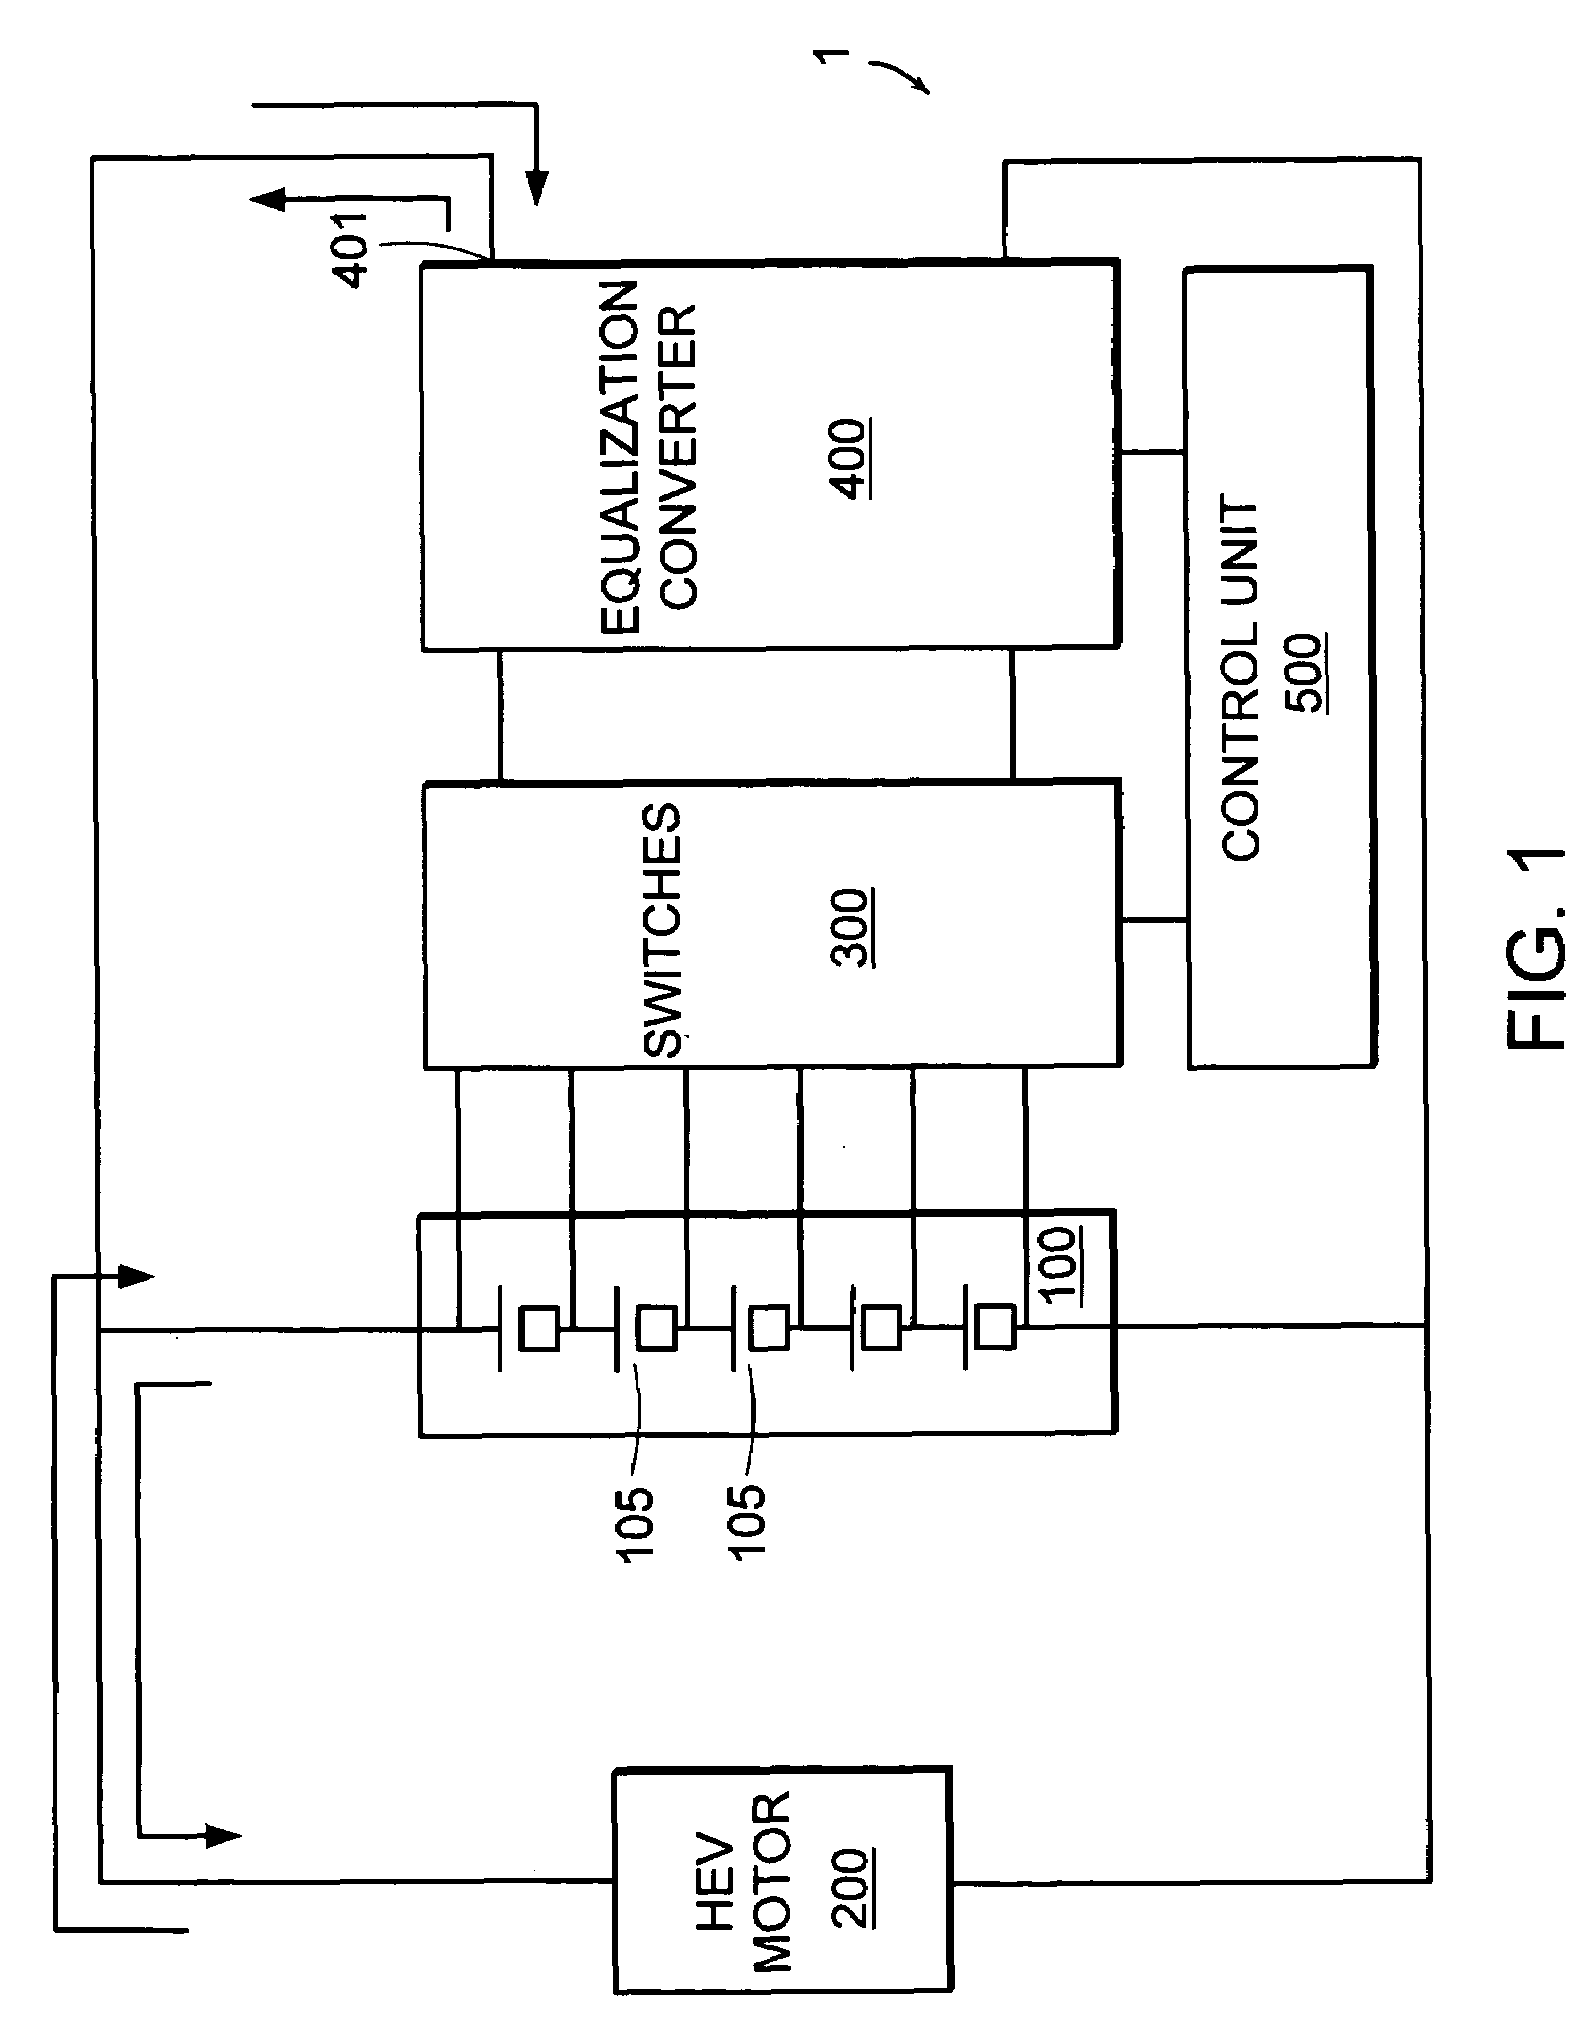 System and method for determining and balancing state of charge among series connected electrical energy storage units